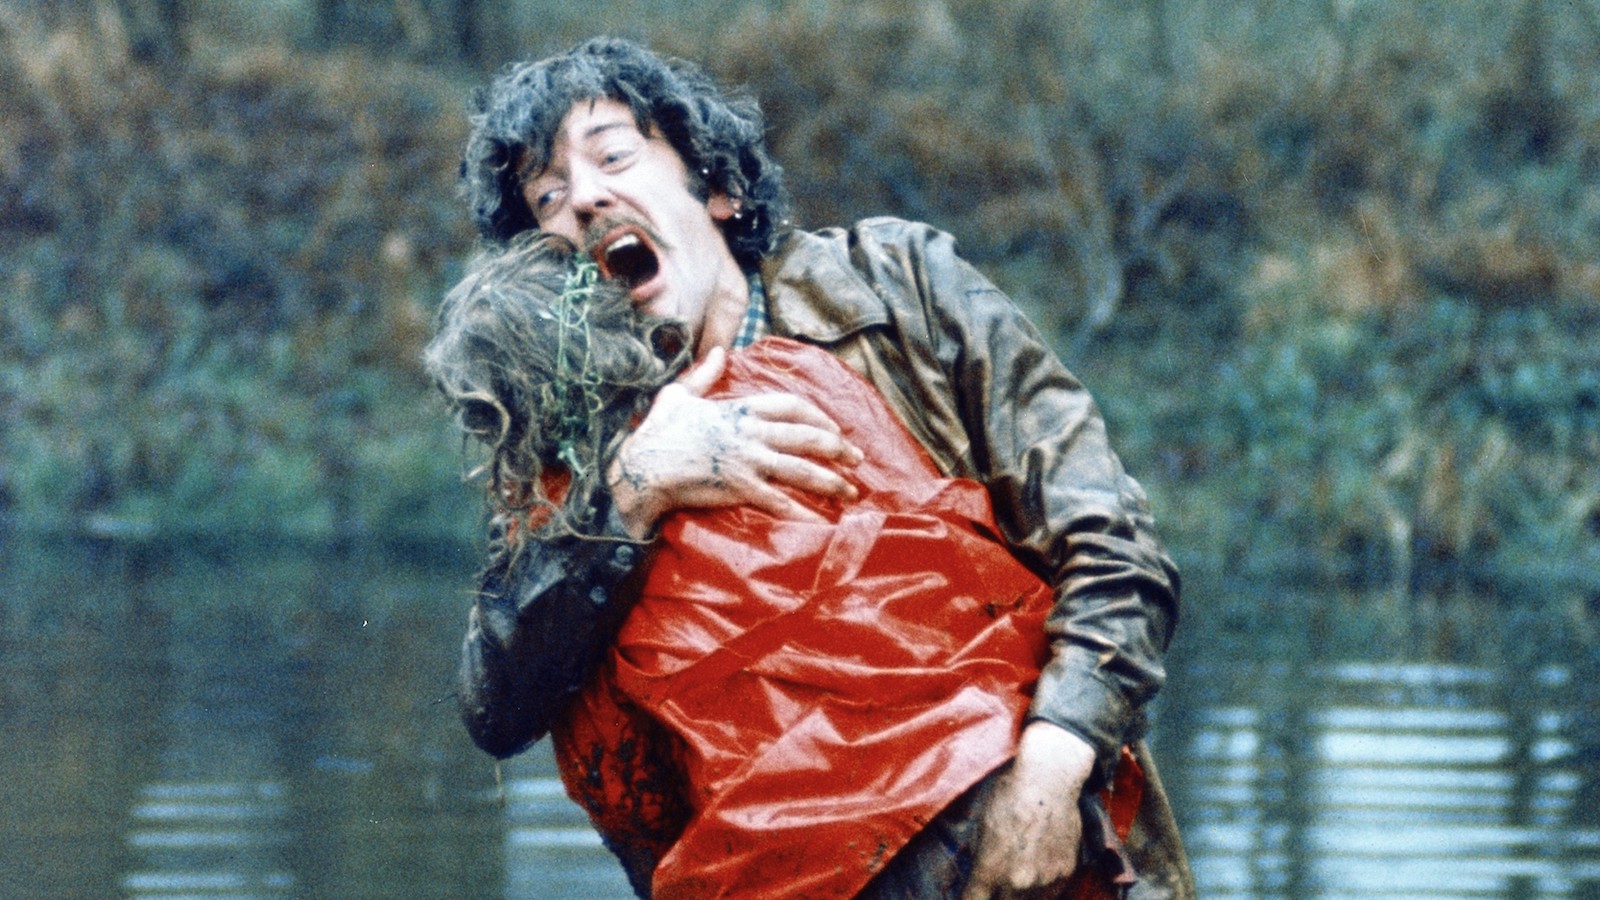 Donald Sutherland in Don't Look Now